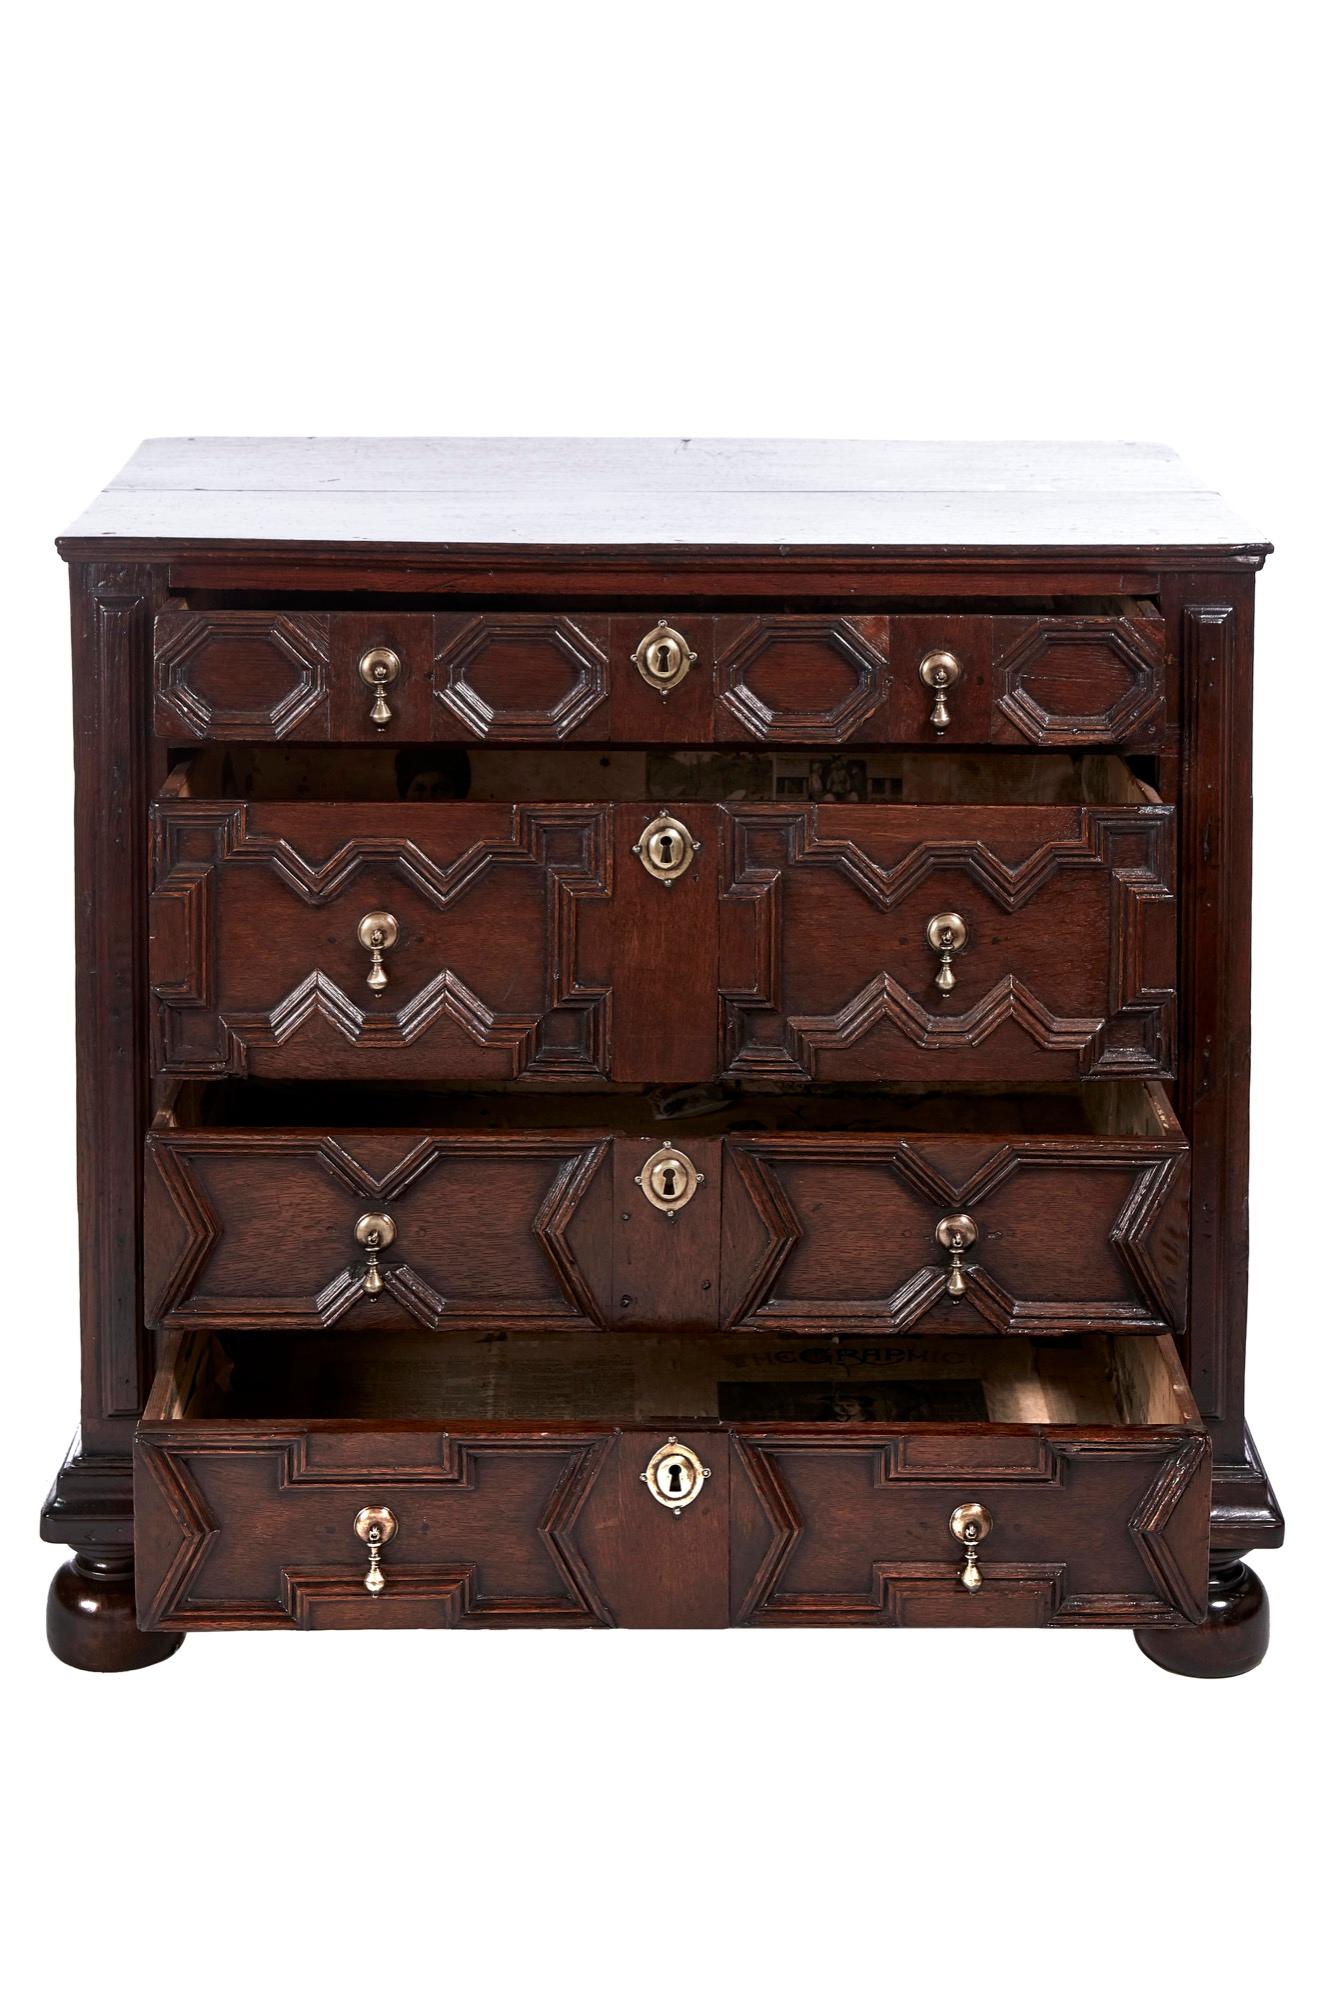 Antique English William & Mary Jacobean oak paneled geometric chest of drawers having a lovely oak top, paneled sides, 4 long drawers with geometrical moldings. Lovely antique newspaper lined drawers, standing on original bun feet.
Lovely color and